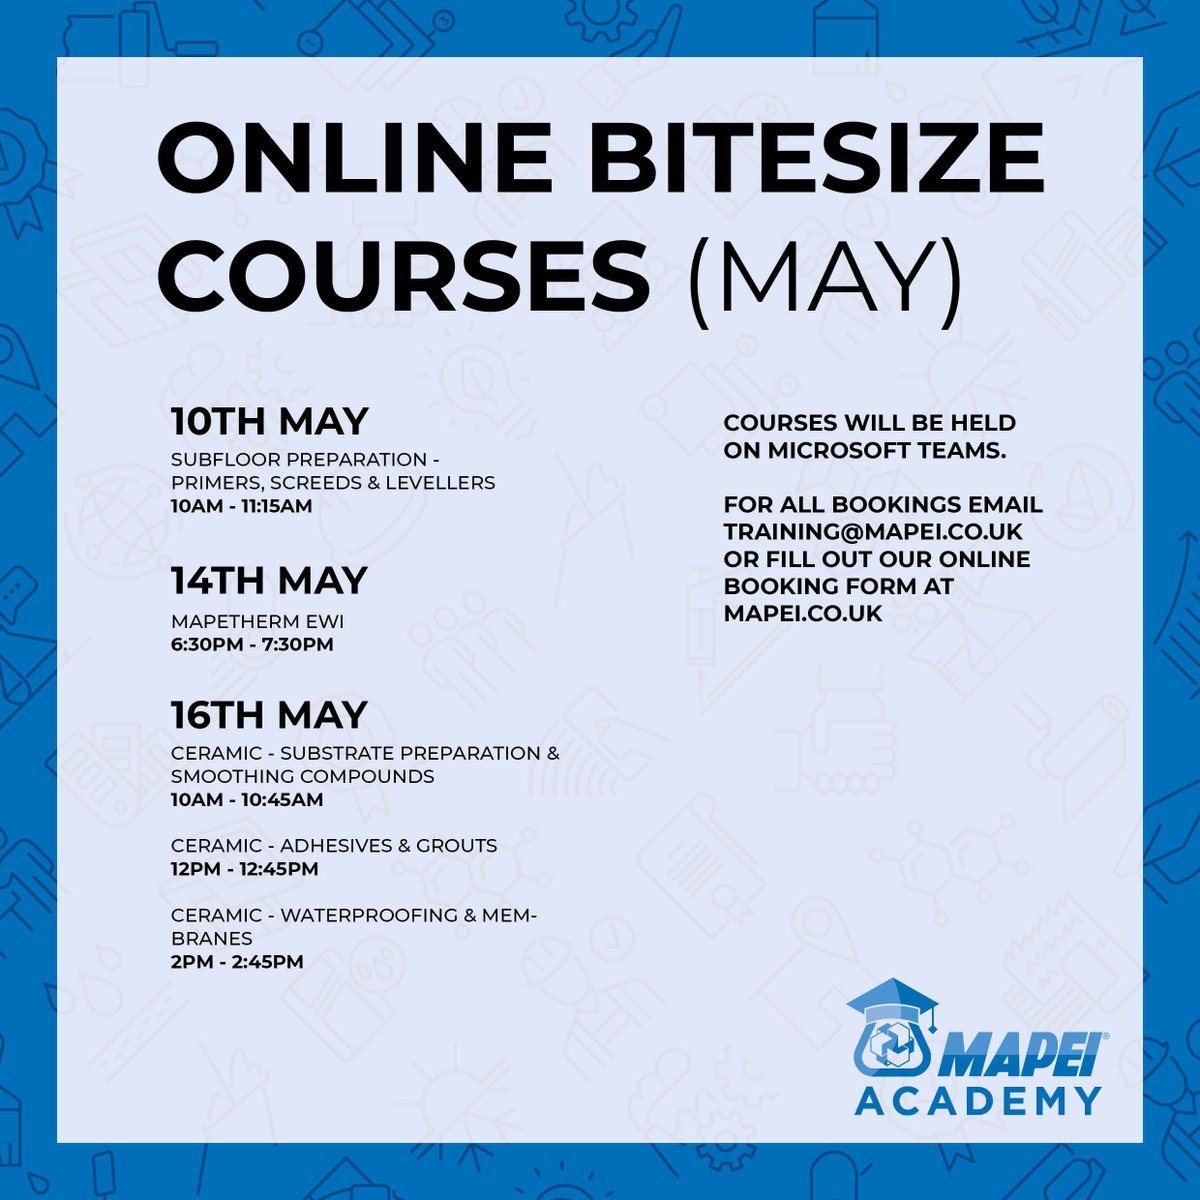 All of our #online bitesize #training courses are free, If you would like to attend, simply visit buff.ly/3Jd6UOh or email the team directly on training@mapei.co.uk

#tiling #substrate #screed #waterproofing #flooring #EWI #coatings #render #ThermalInsulation #insulation